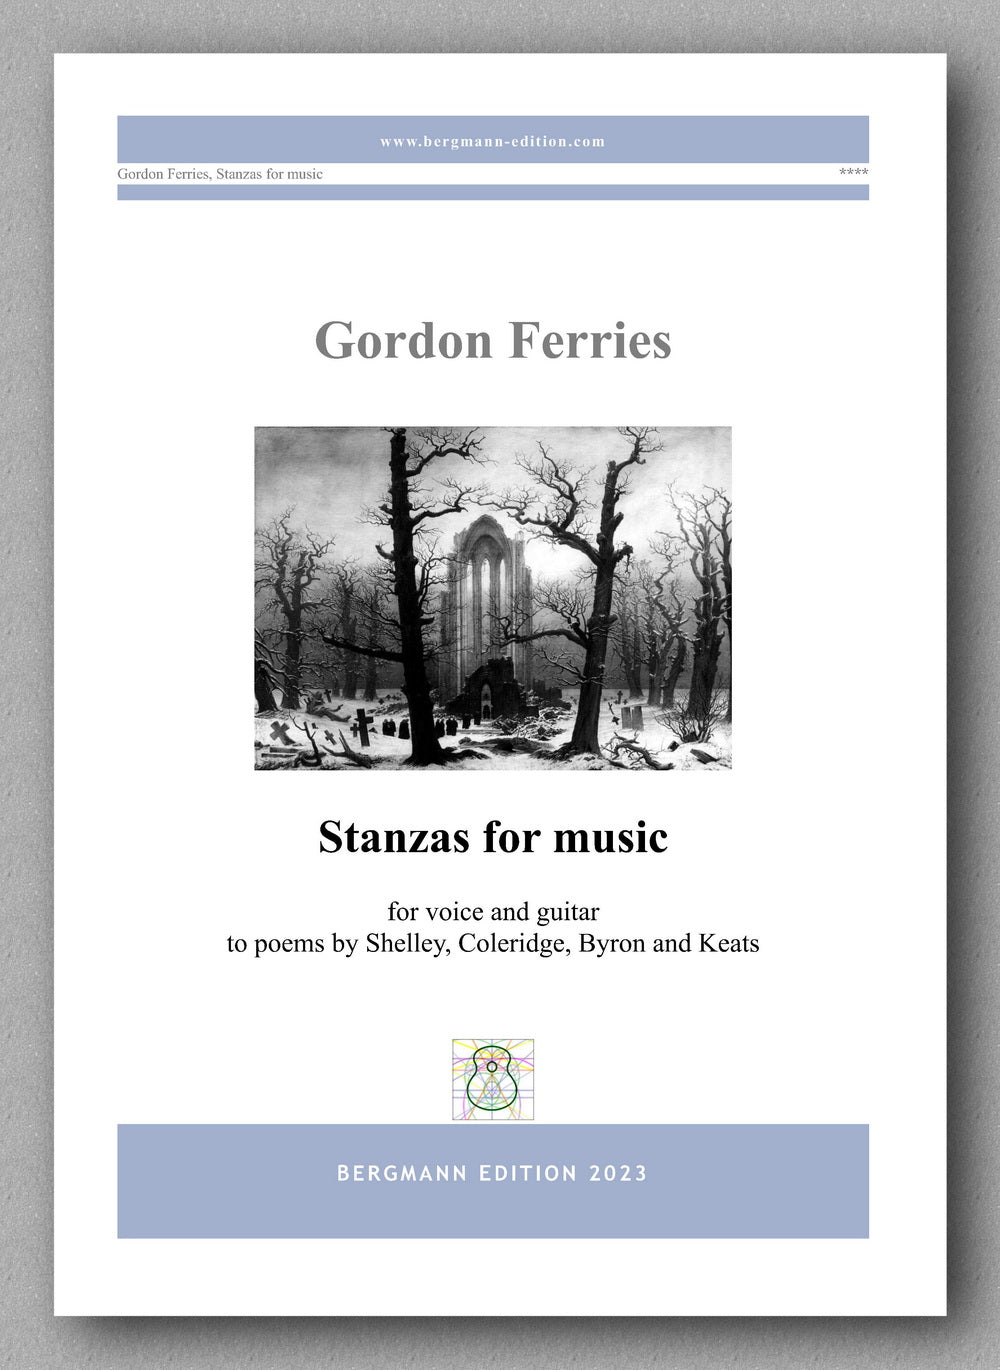 Gordon Ferries, Stanzas for music - preview of the cover